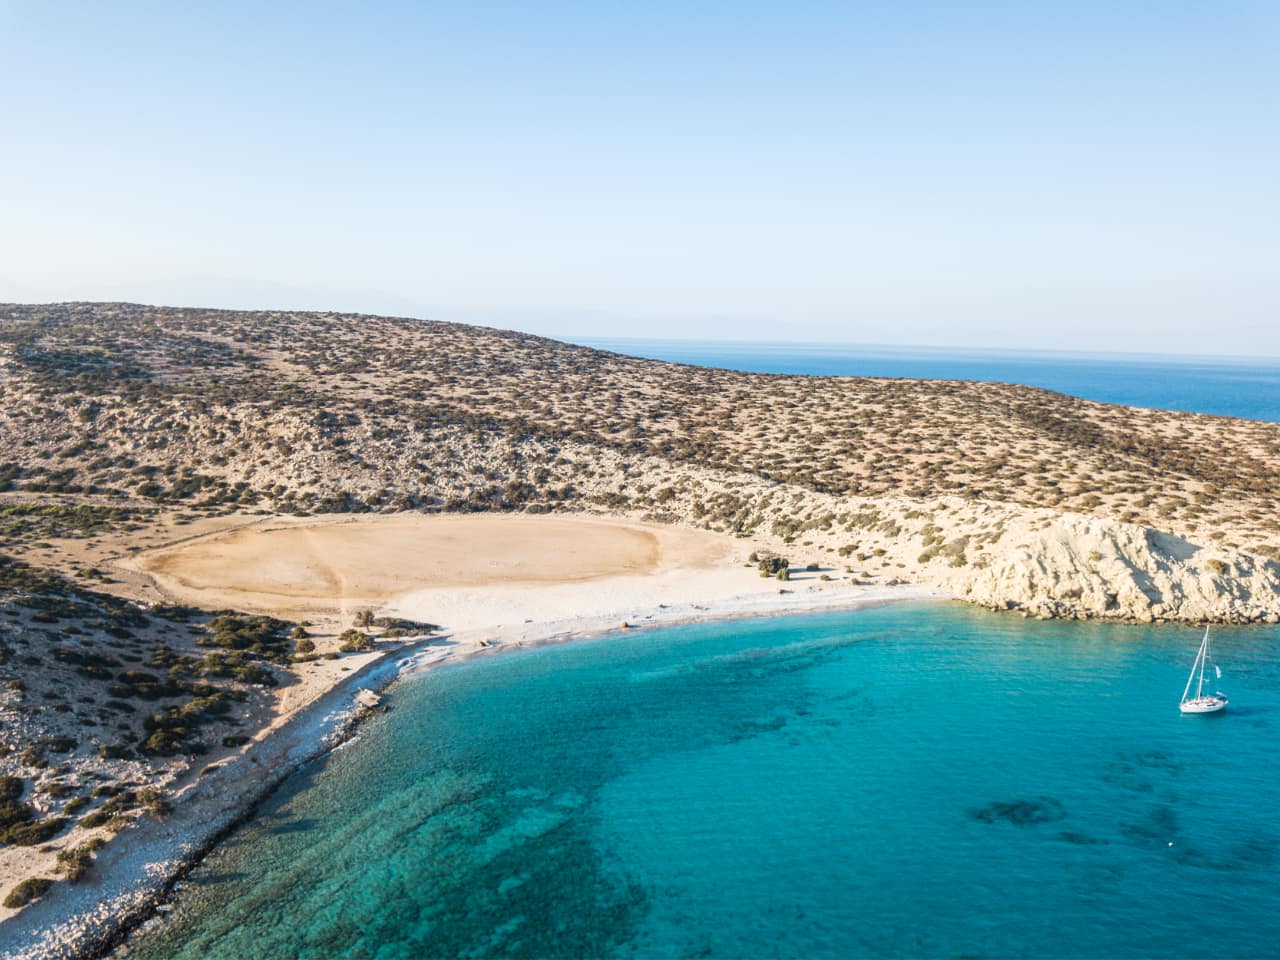 Unwind, relax and recharge your batteries in lovely Crete